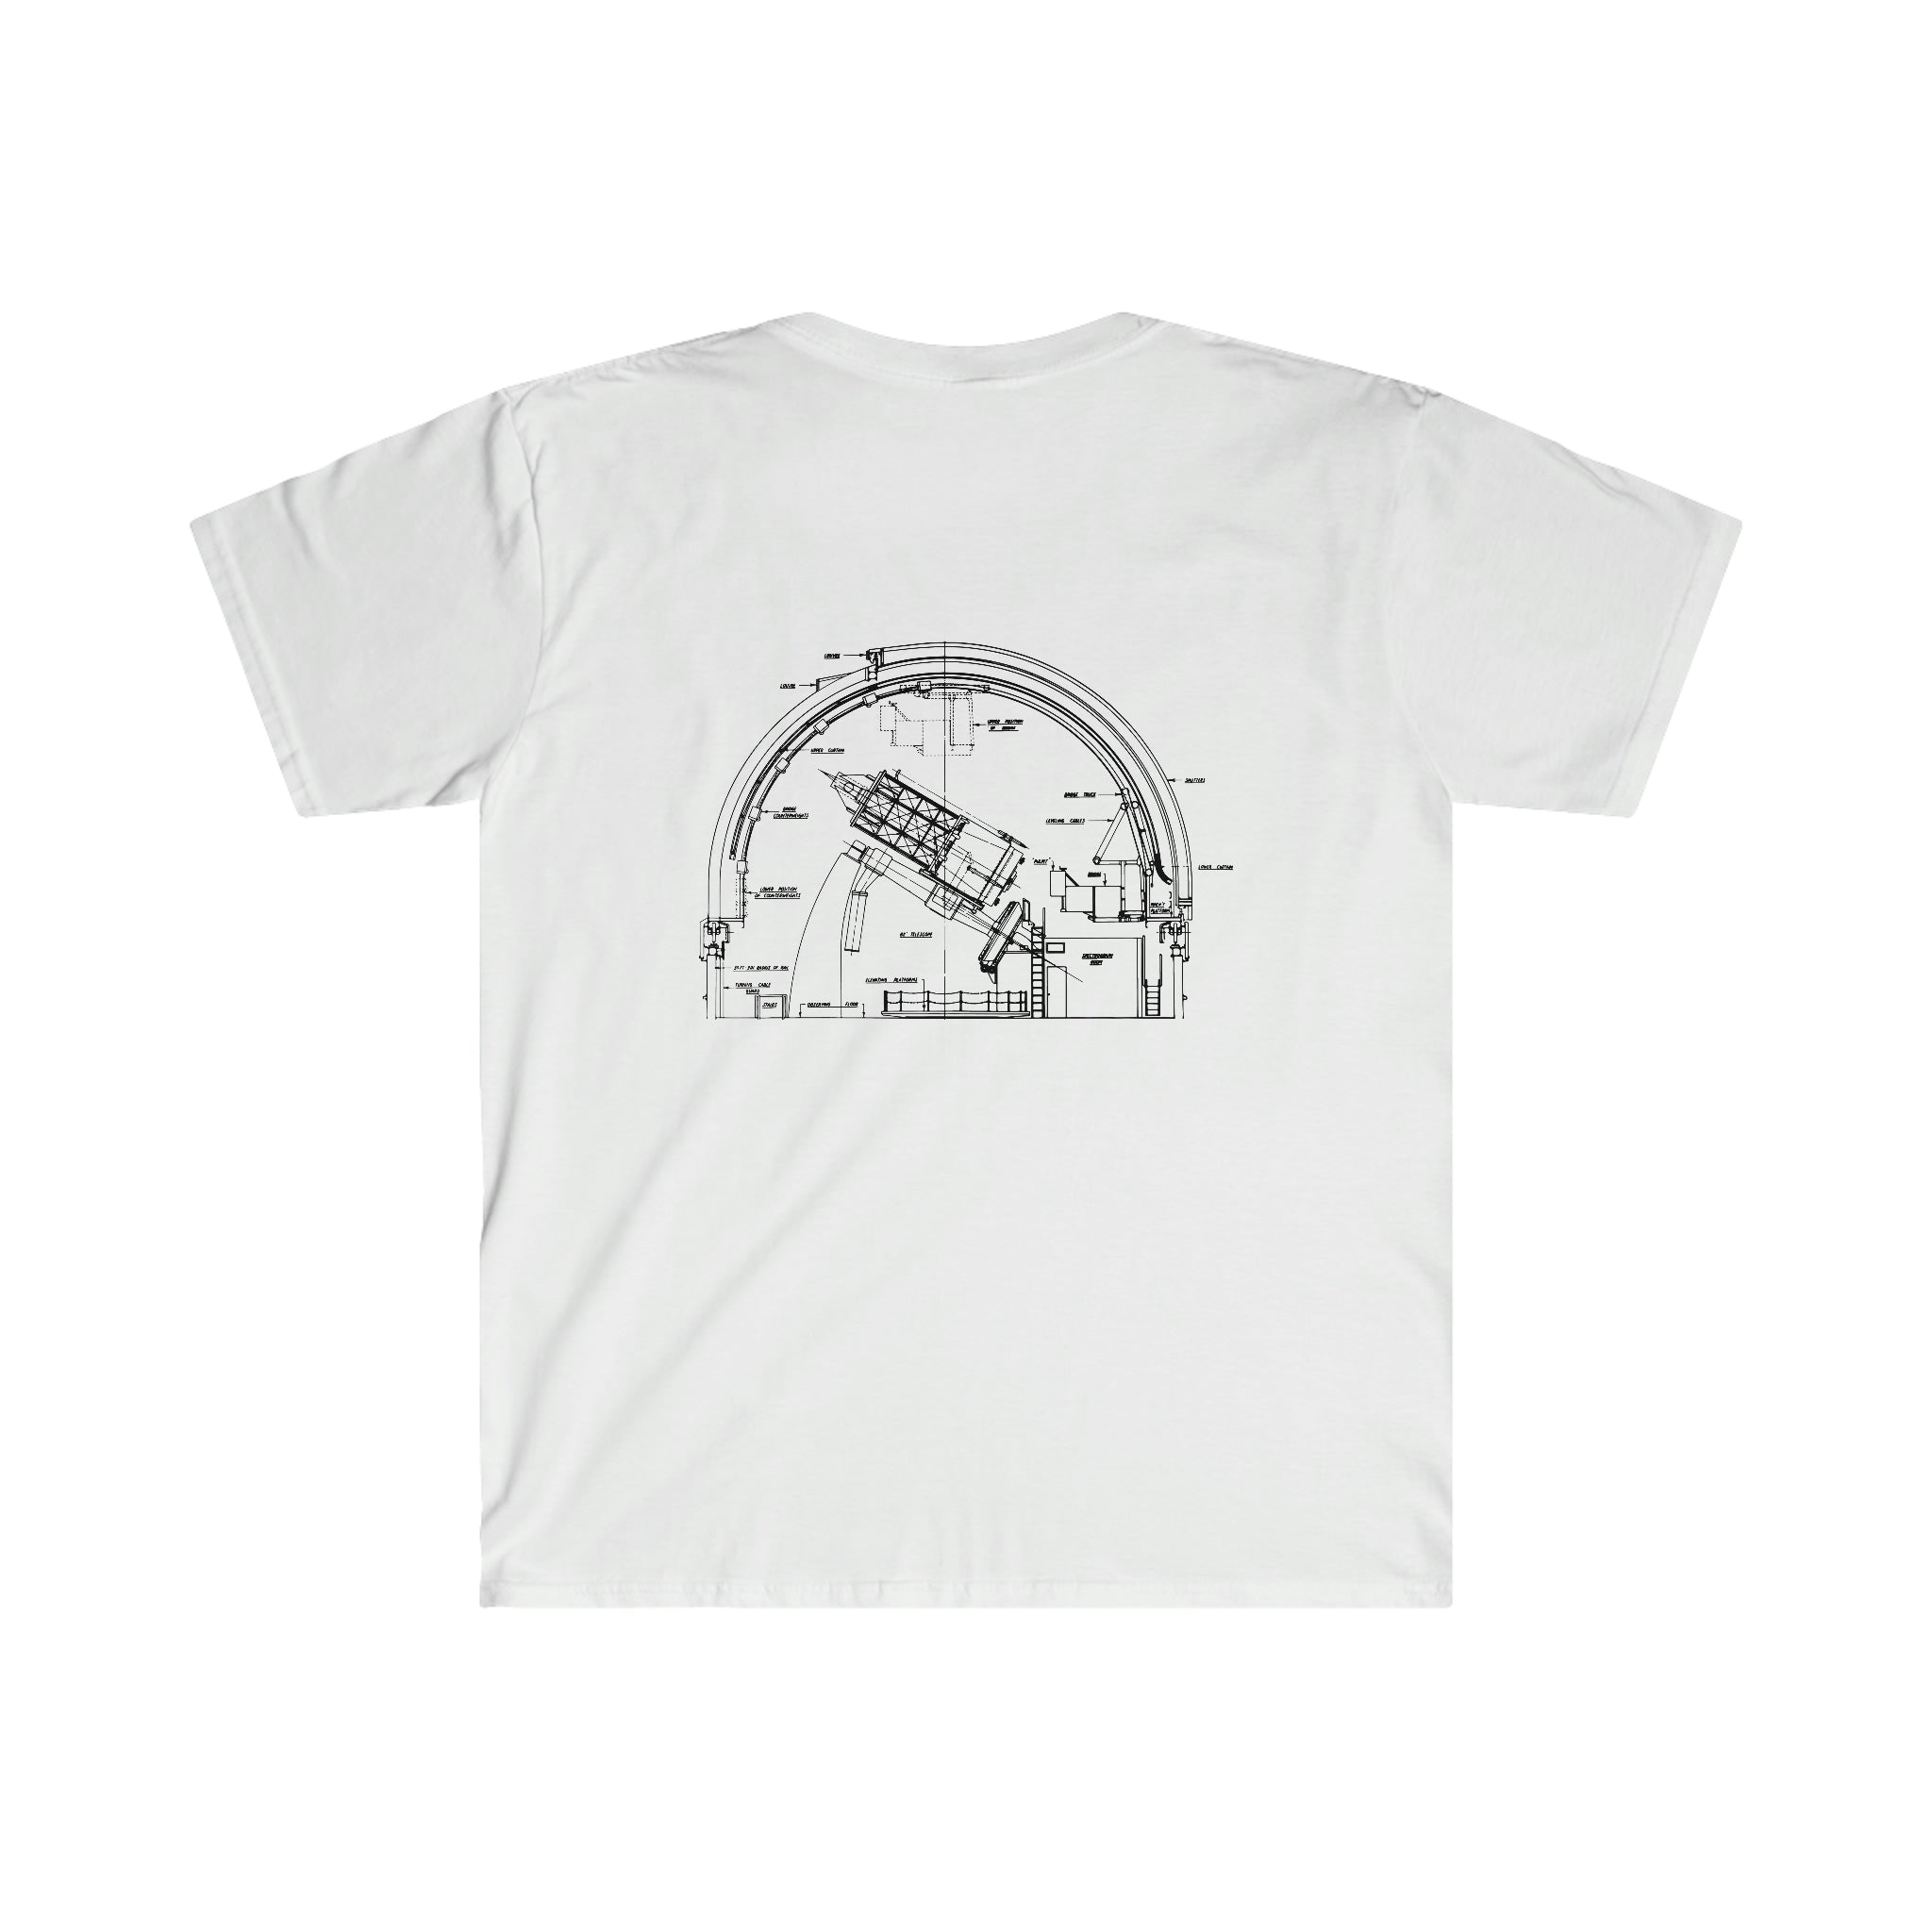 A Space is Waiting T-Shirt with a drawing of a machine.